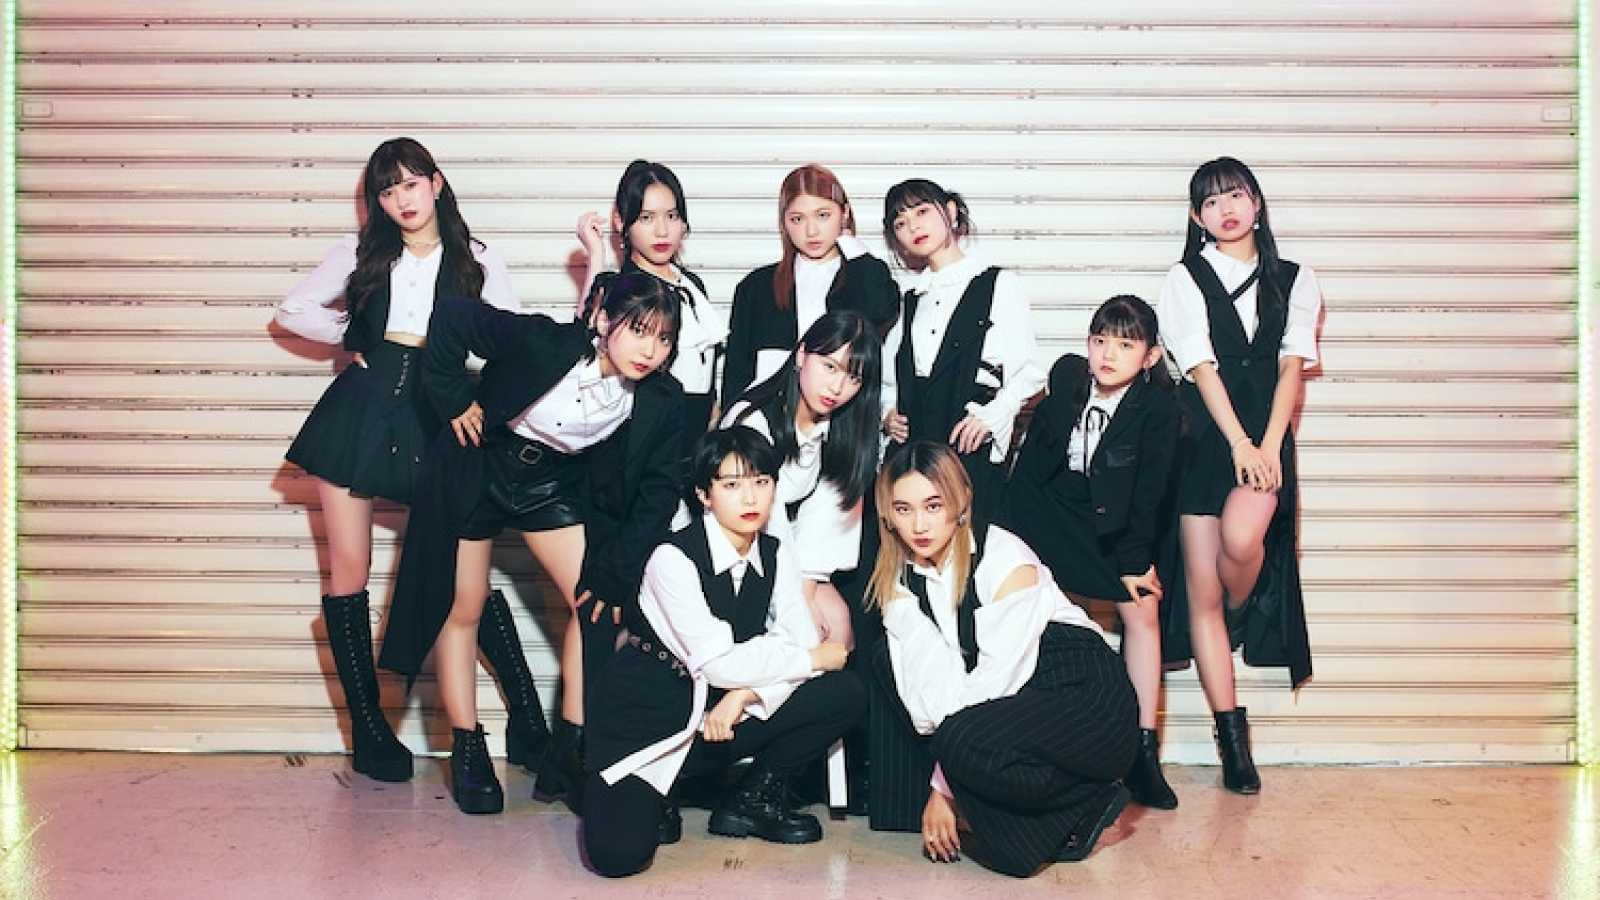 ANGERME © DC FACTORY. All rights reserved.